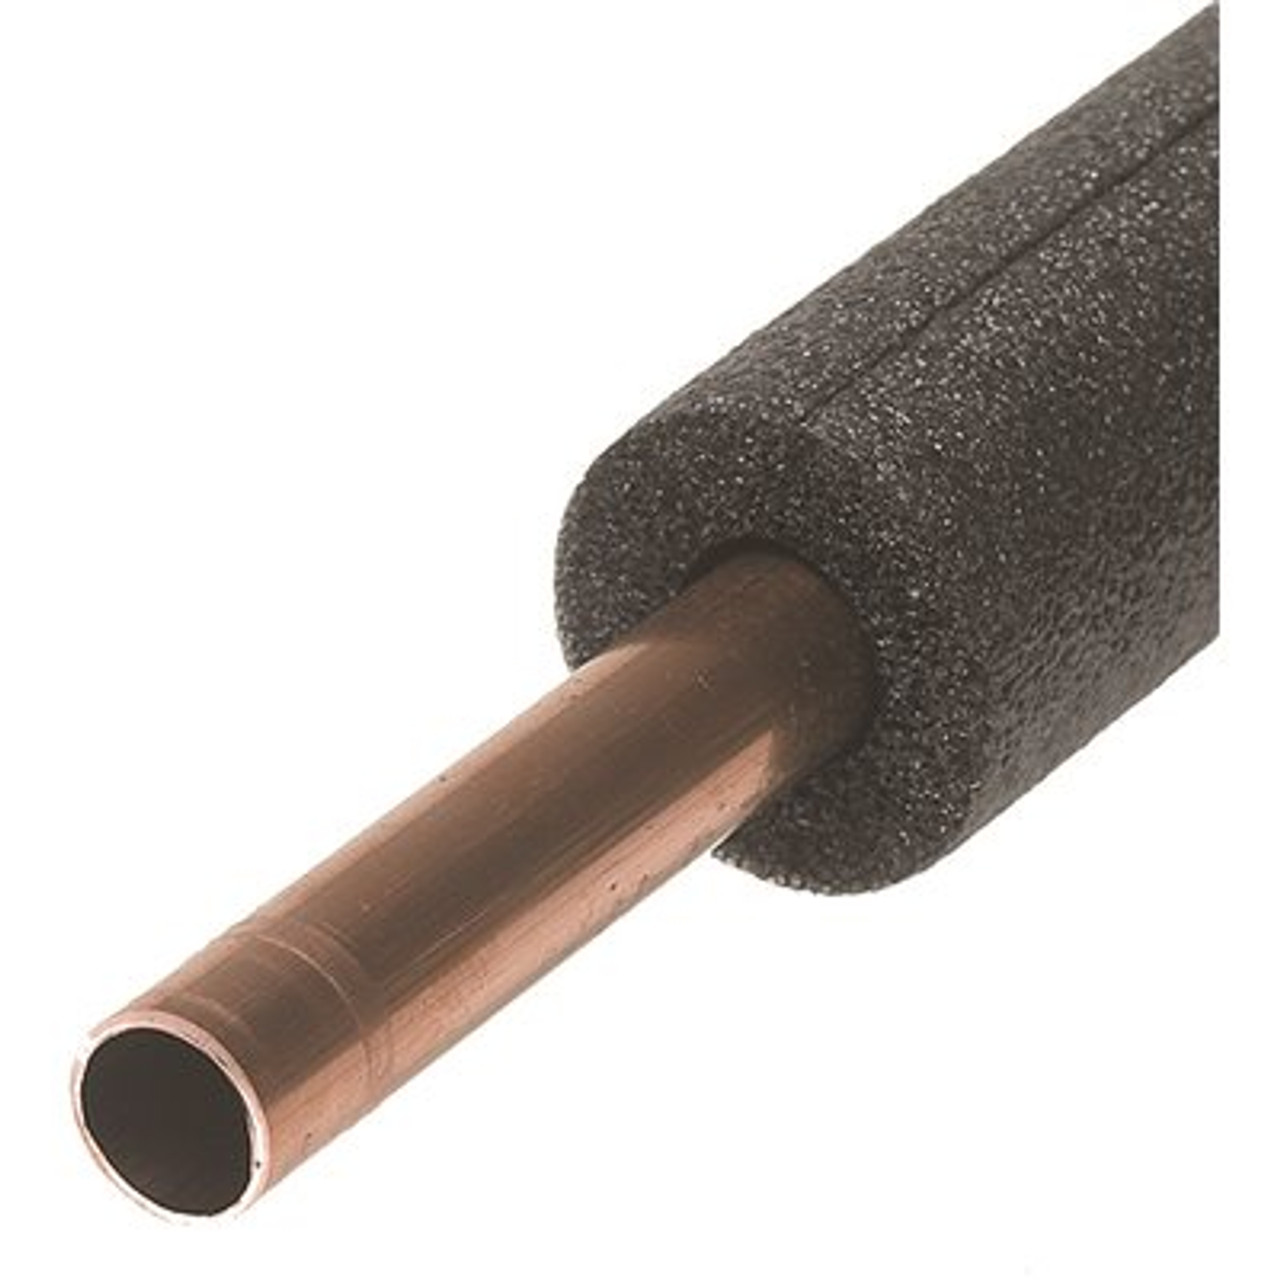 Frost King 1/2 In. X 2 In. Thick Wall X 6 Ft. Bulk Self Seal Foam Pipe Insulation